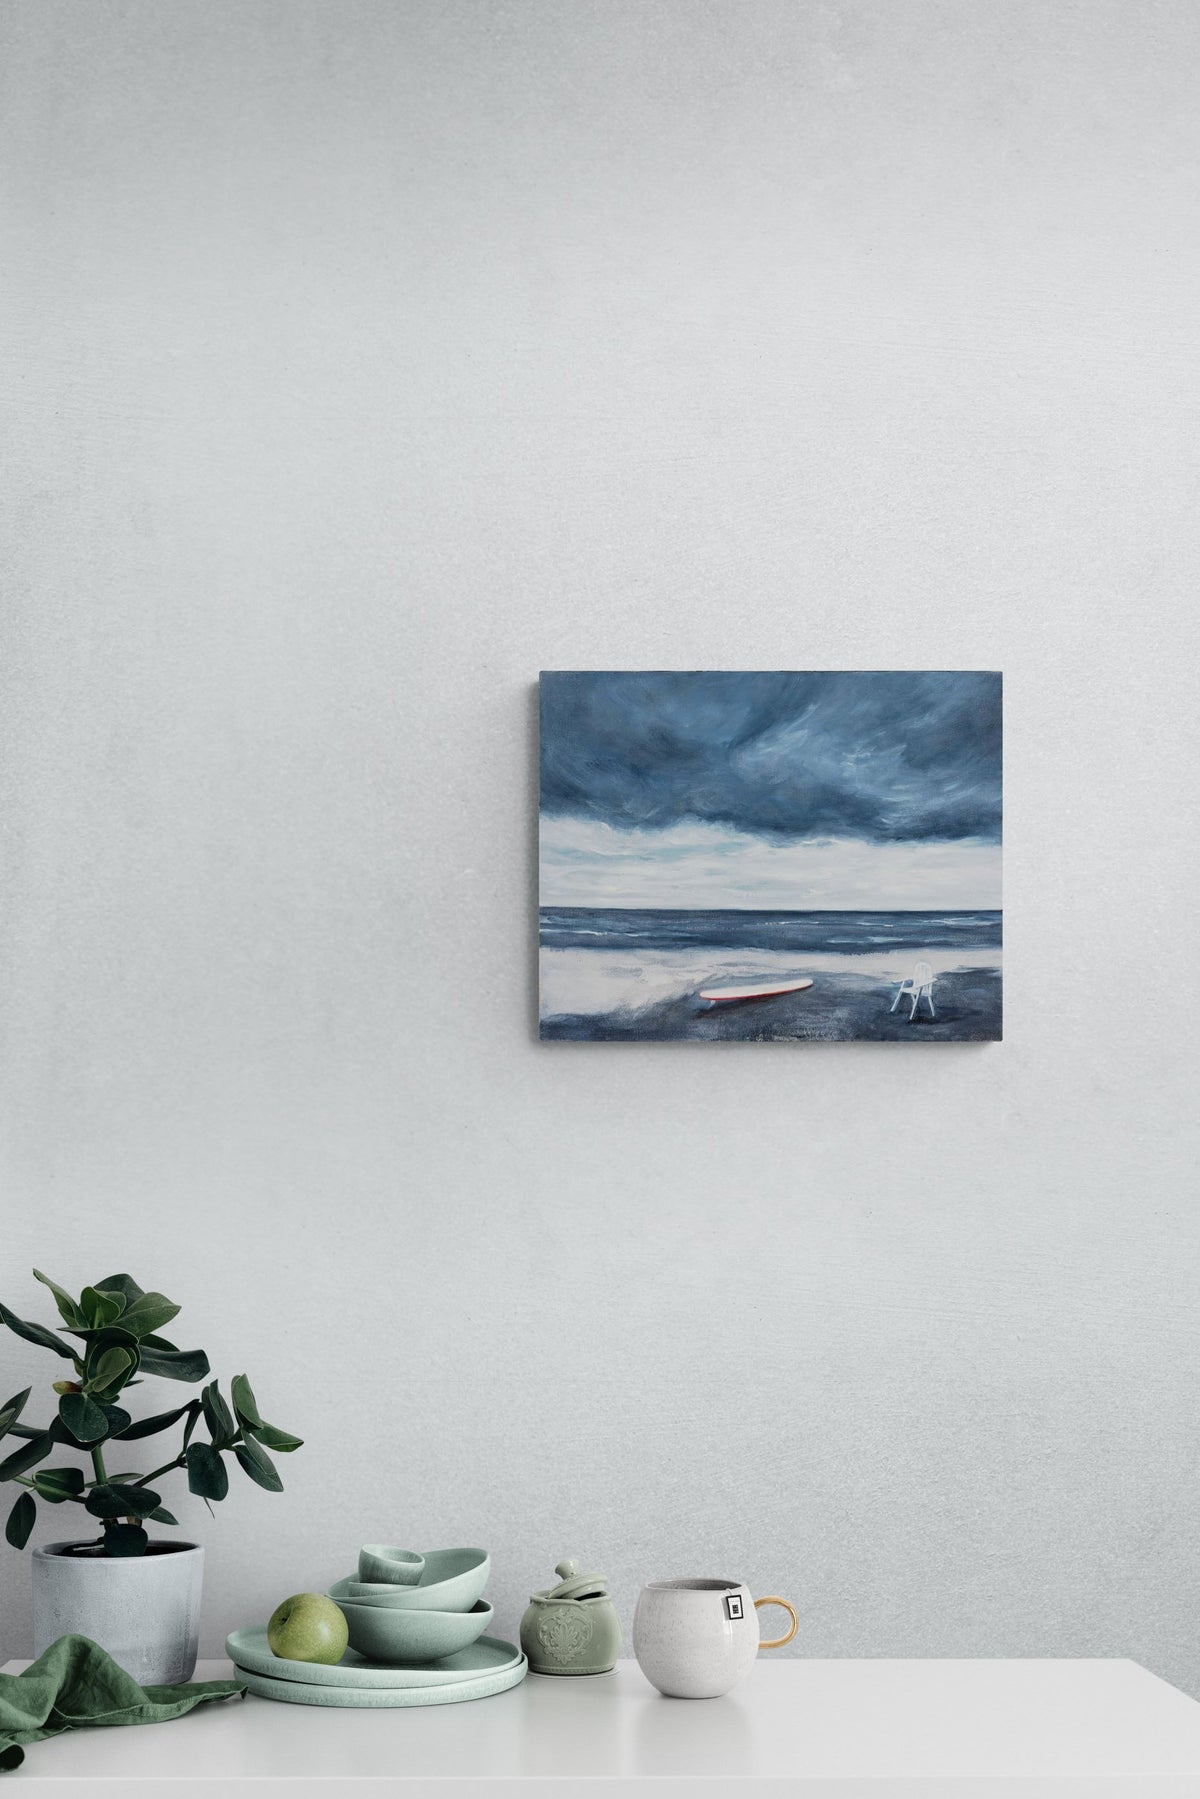 Seascape Ocean Abstract Painting, blue tones fills the kitchen with energy & conversation